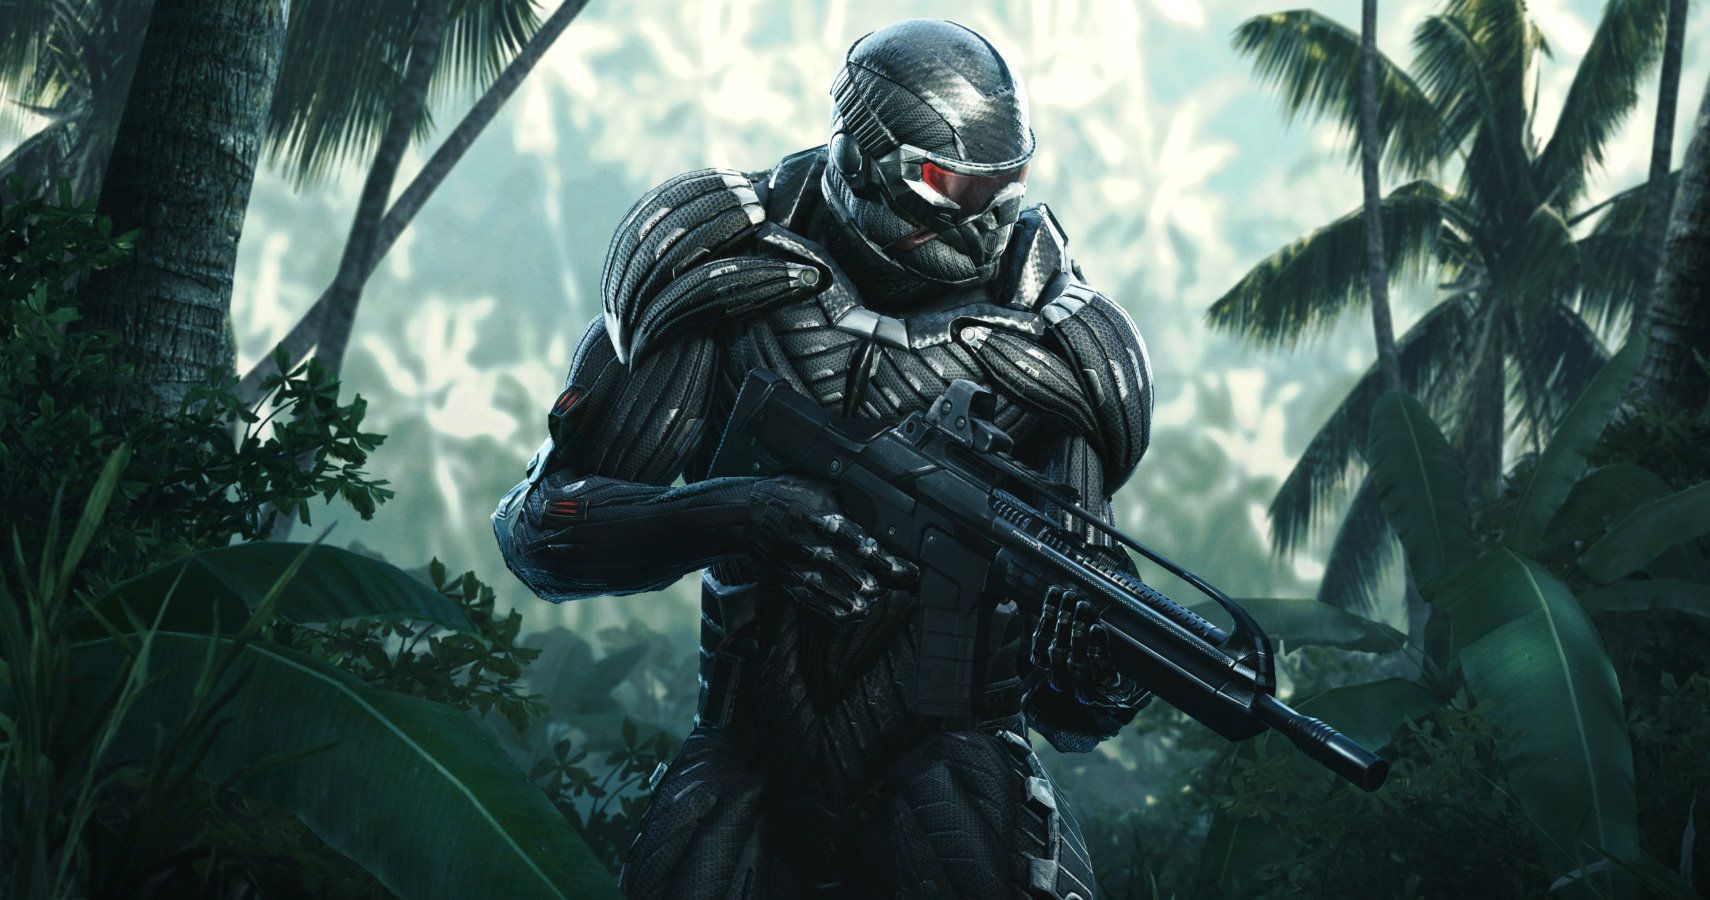 Crytek Paid Over €120k For Six Months Of Denuvo DRM For Crysis Remastered